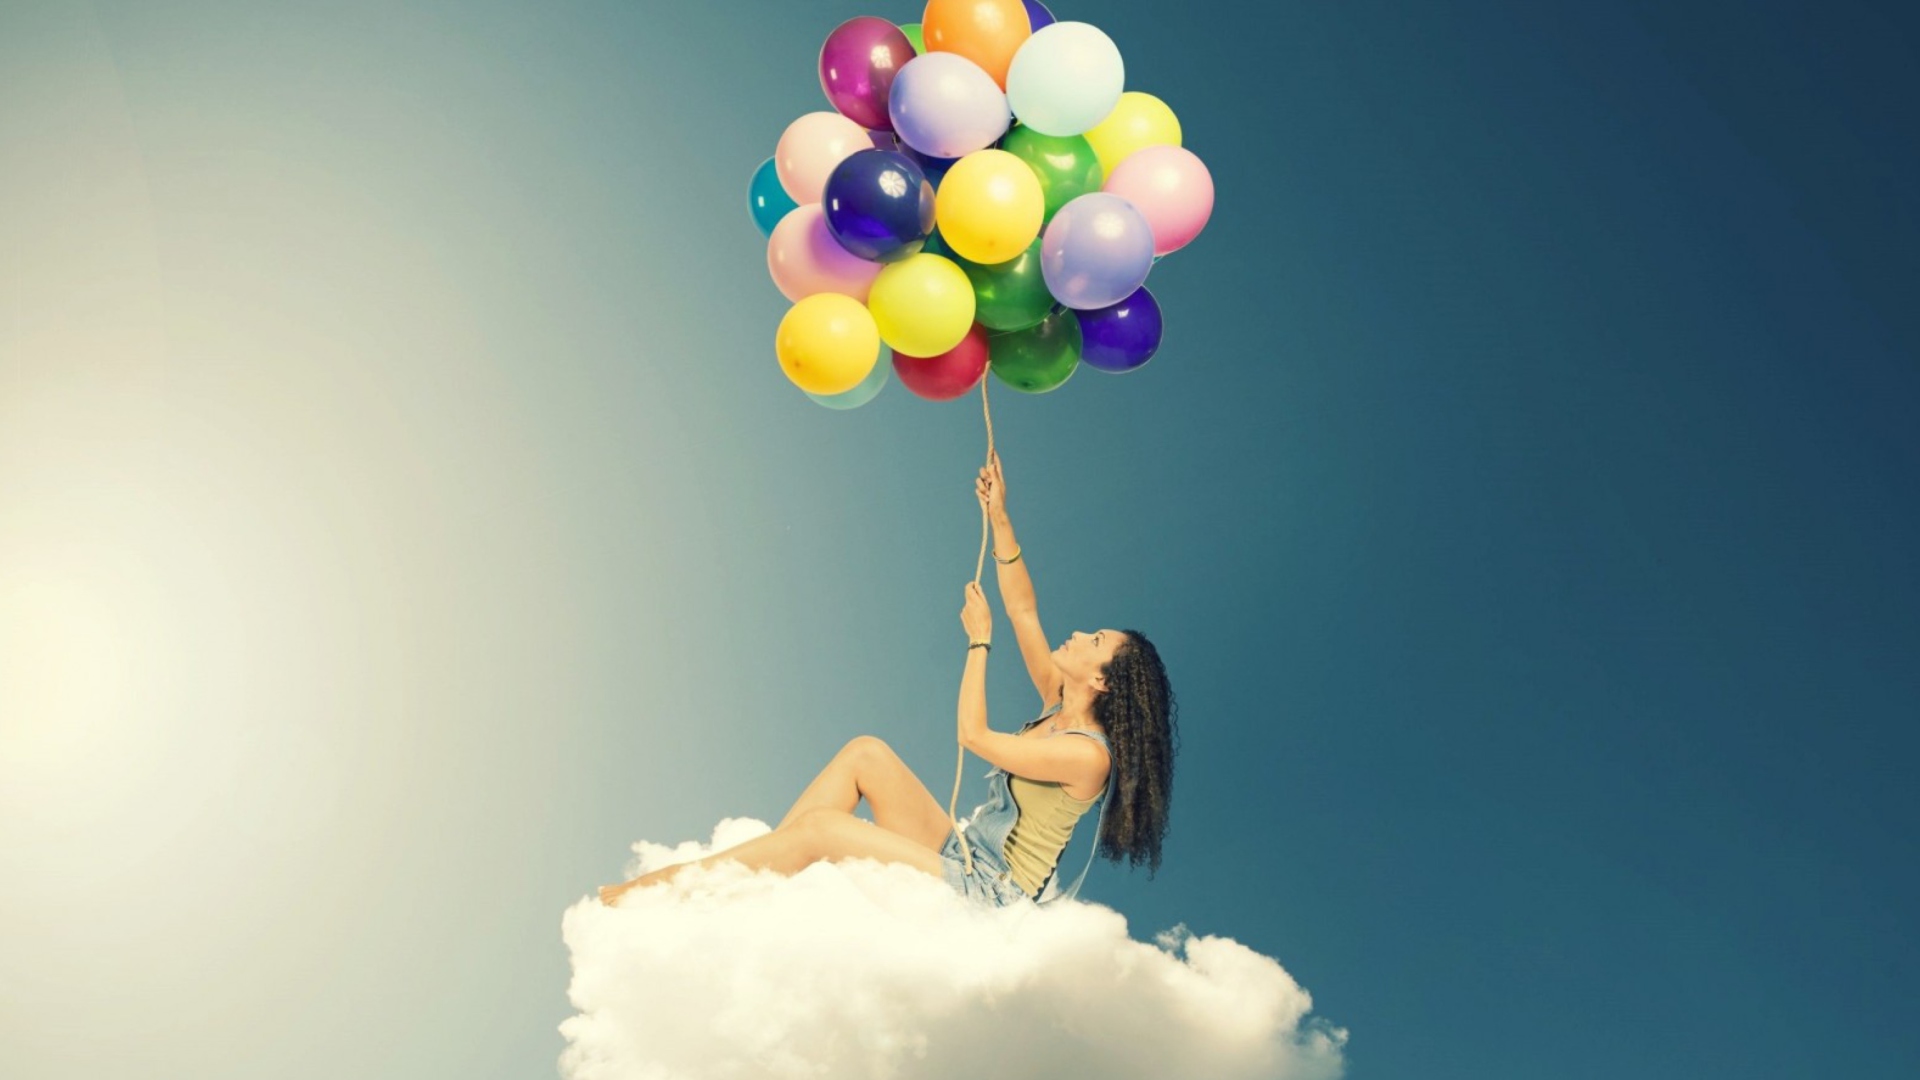 Flyin High On Cloud With Balloons Wallpaper for 1920x1080